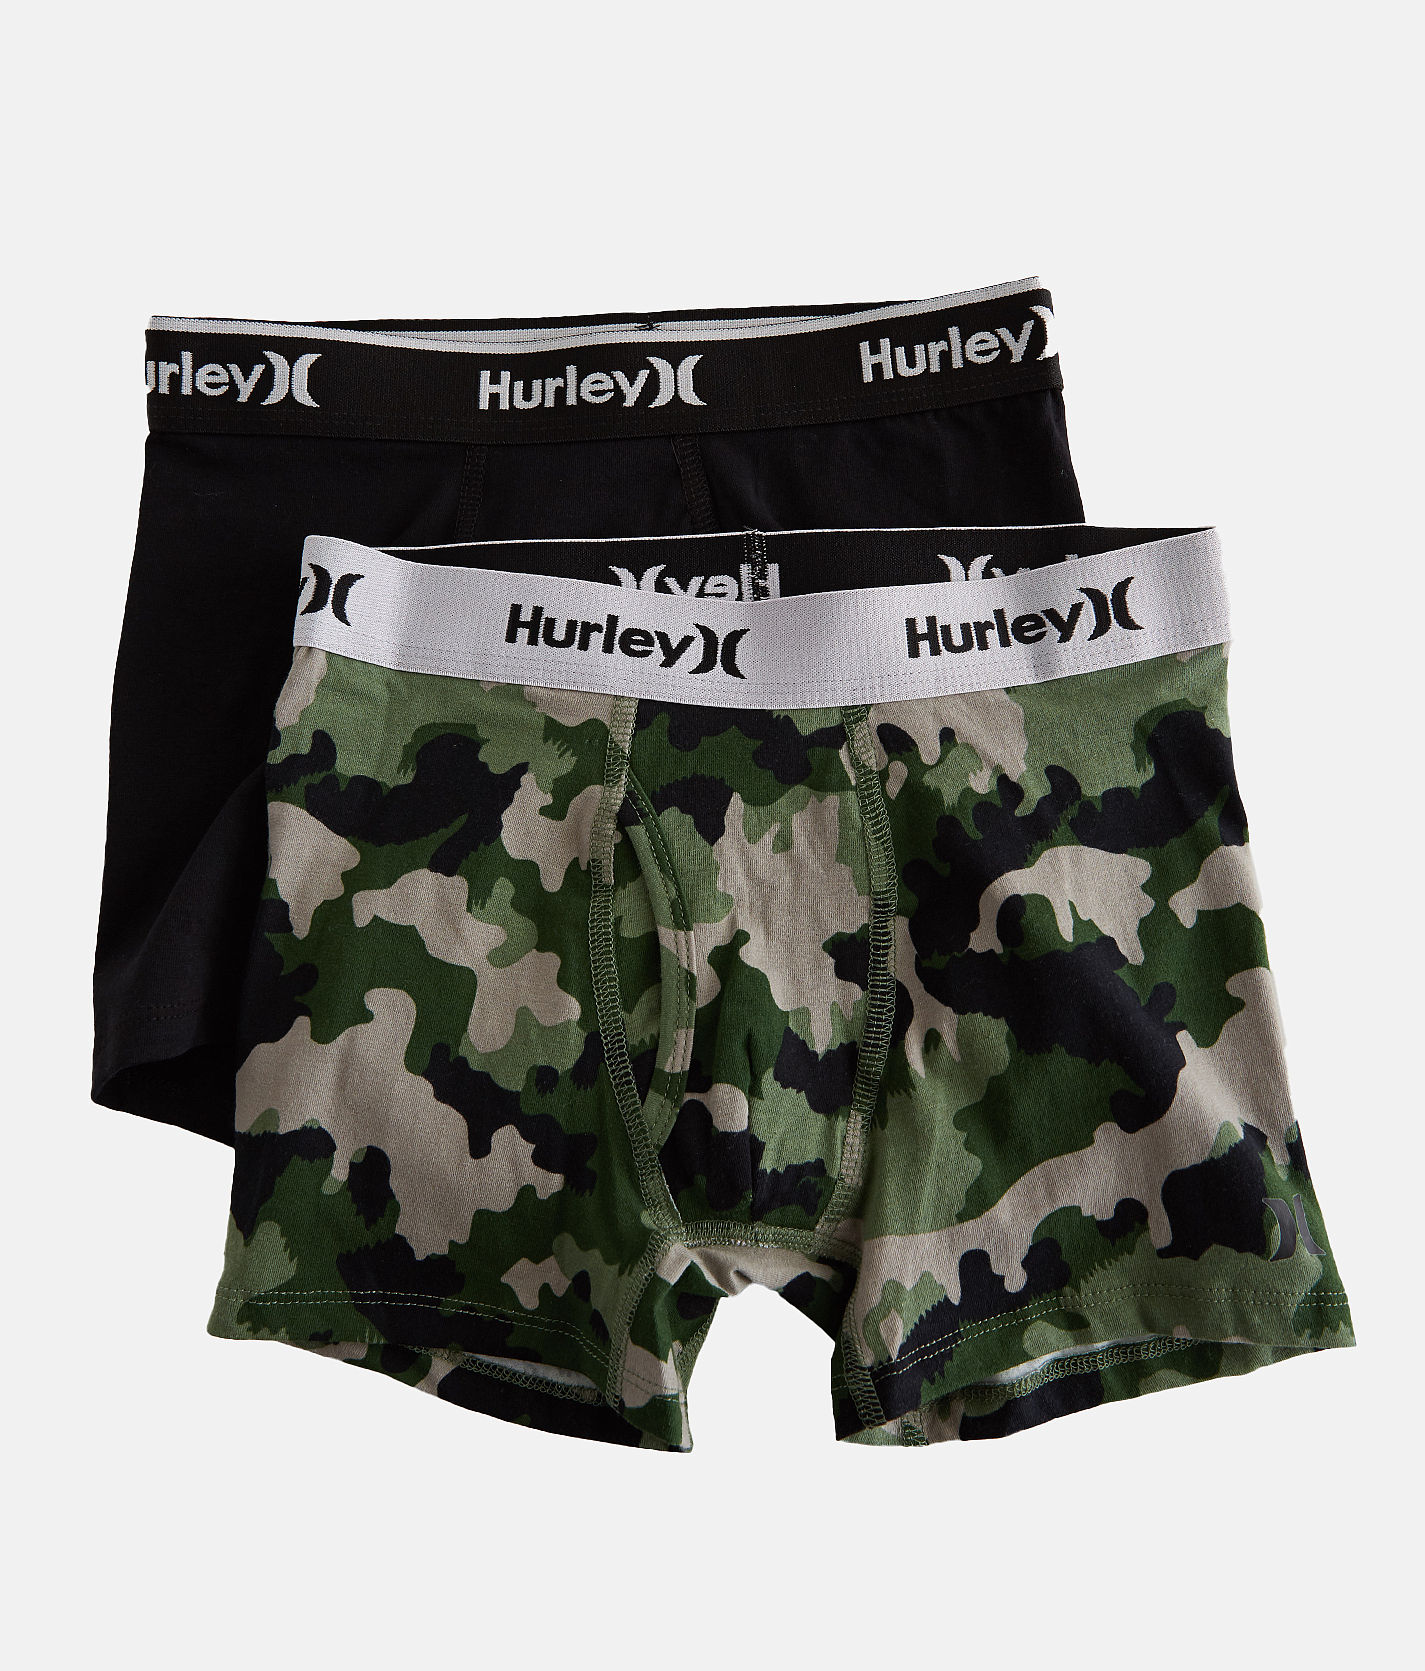 Boys - Hurley 2 Pack Stretch Boxer Briefs - Boy's Boxers in Black